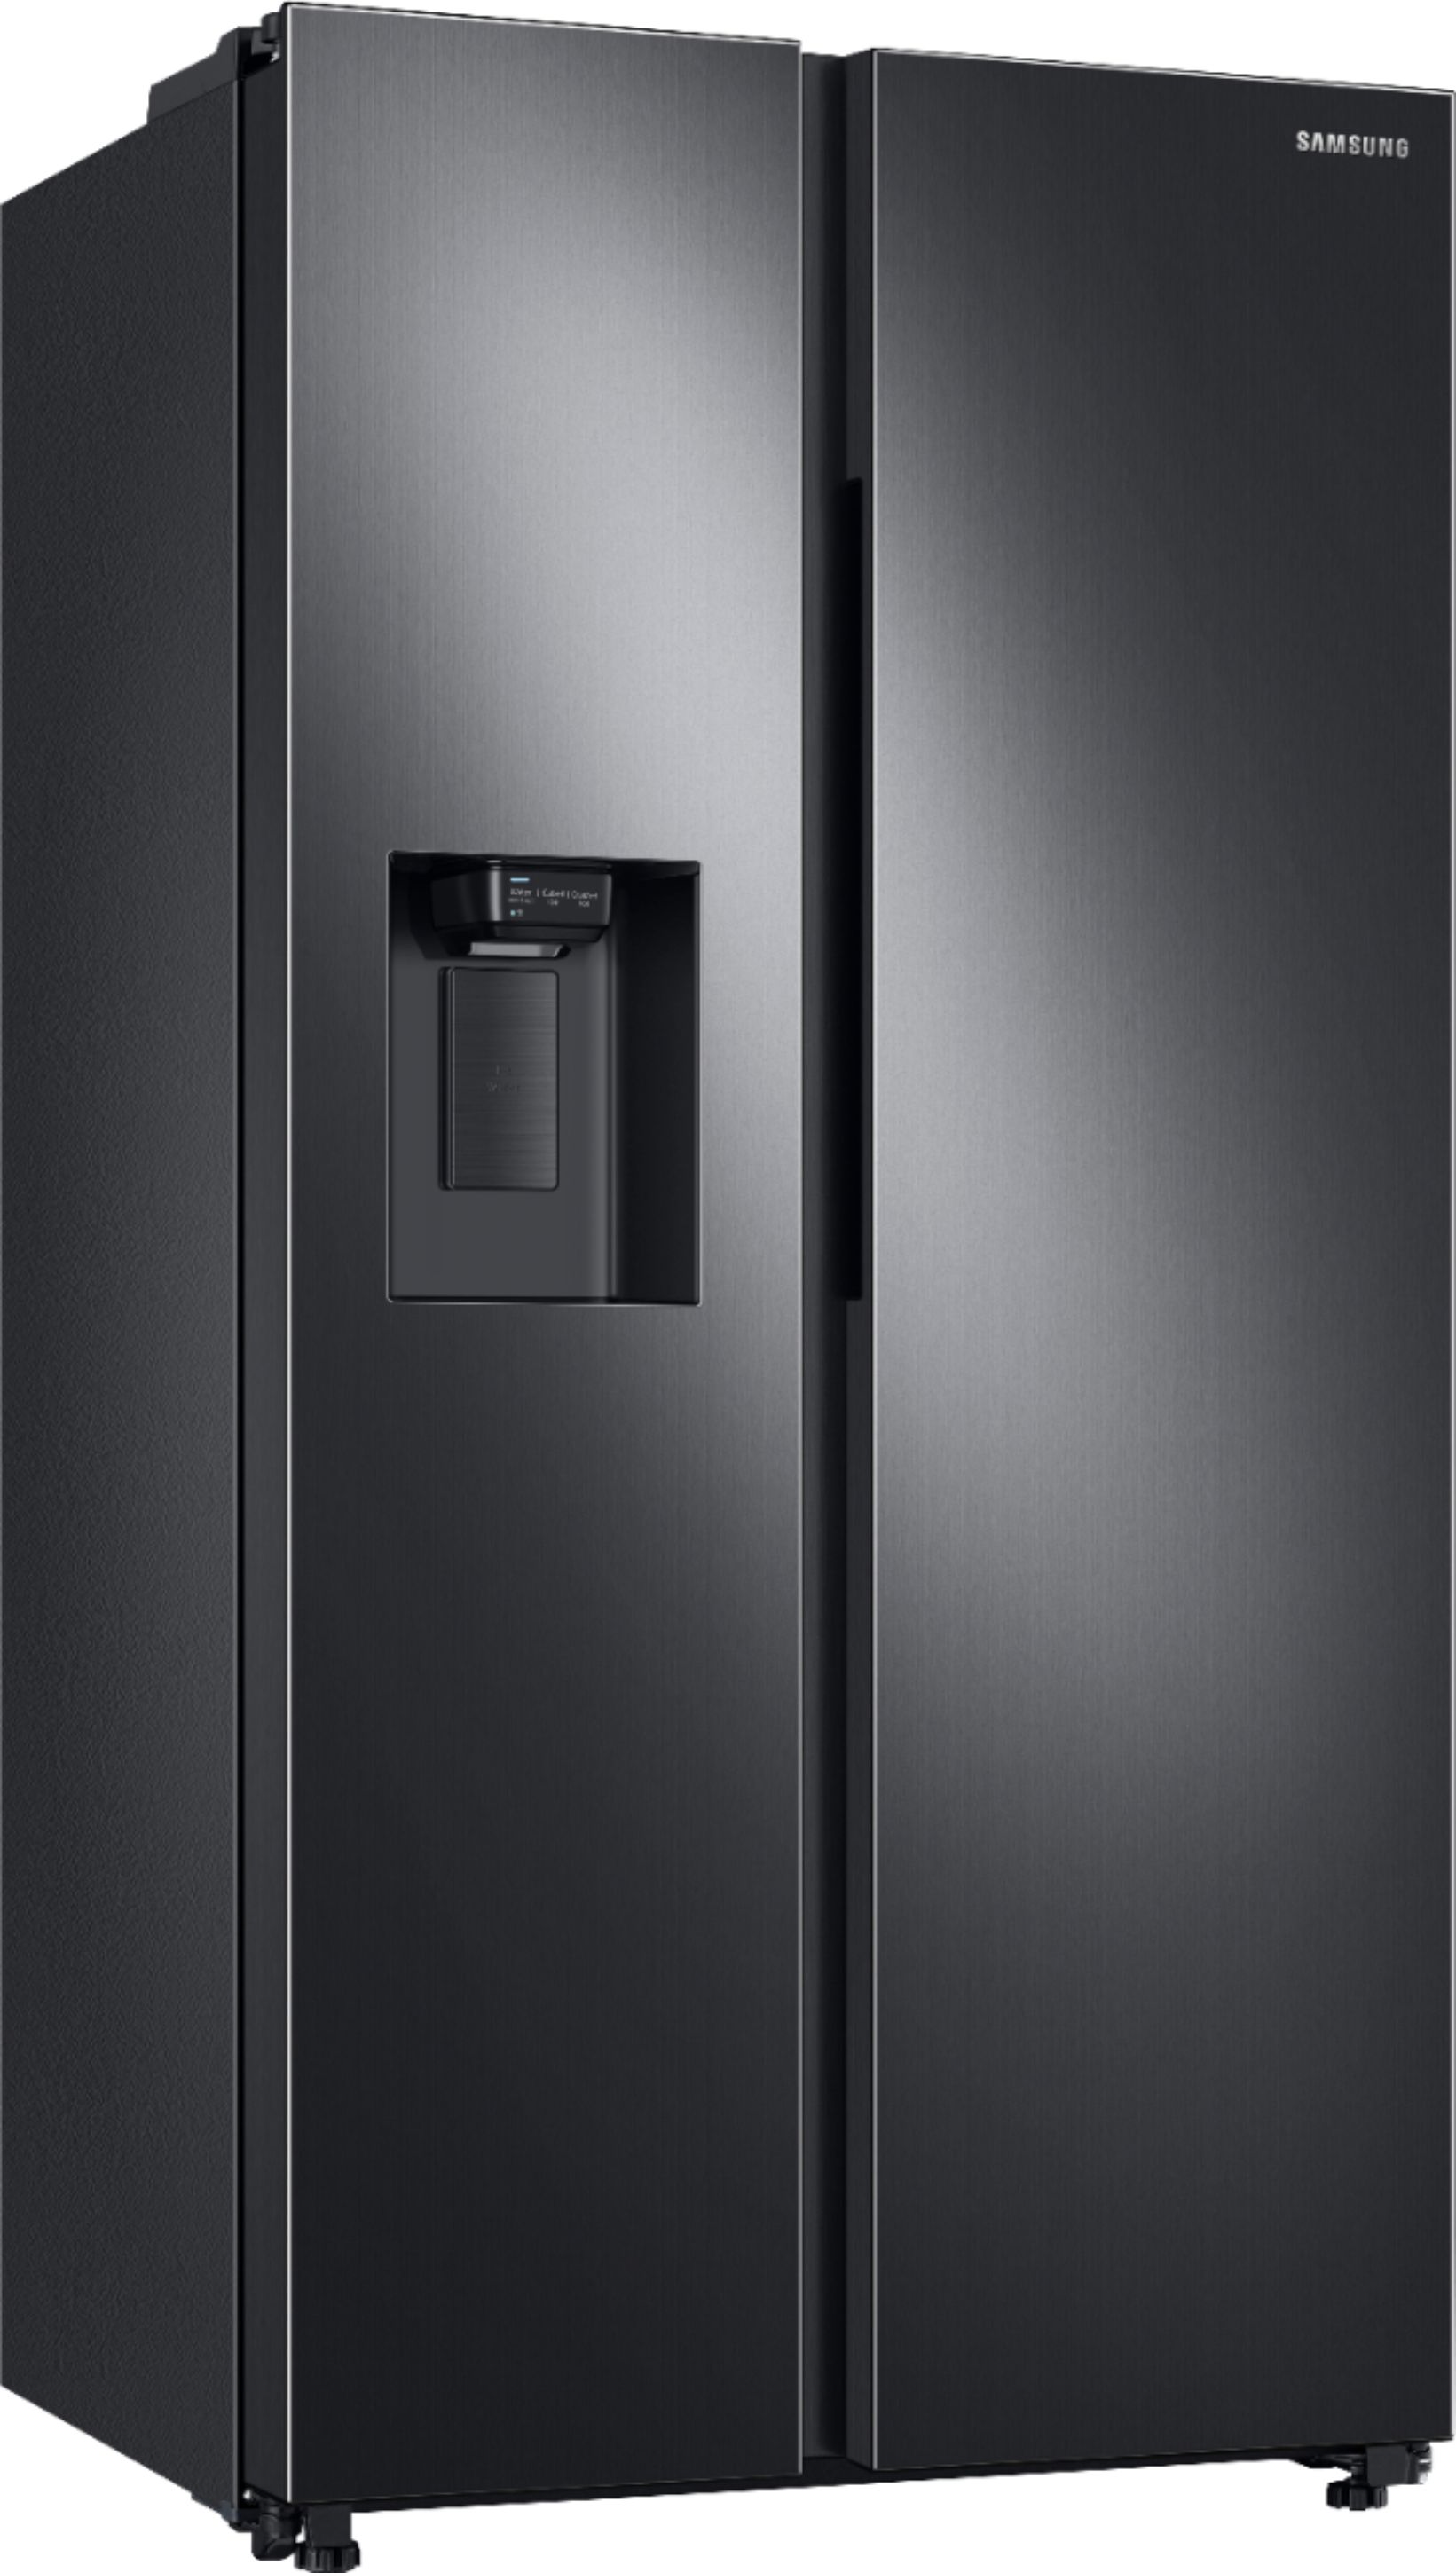 Angle View: Samsung - 22 Cu. Ft. Side-by-Side Counter-Depth Refrigerator - Black stainless steel